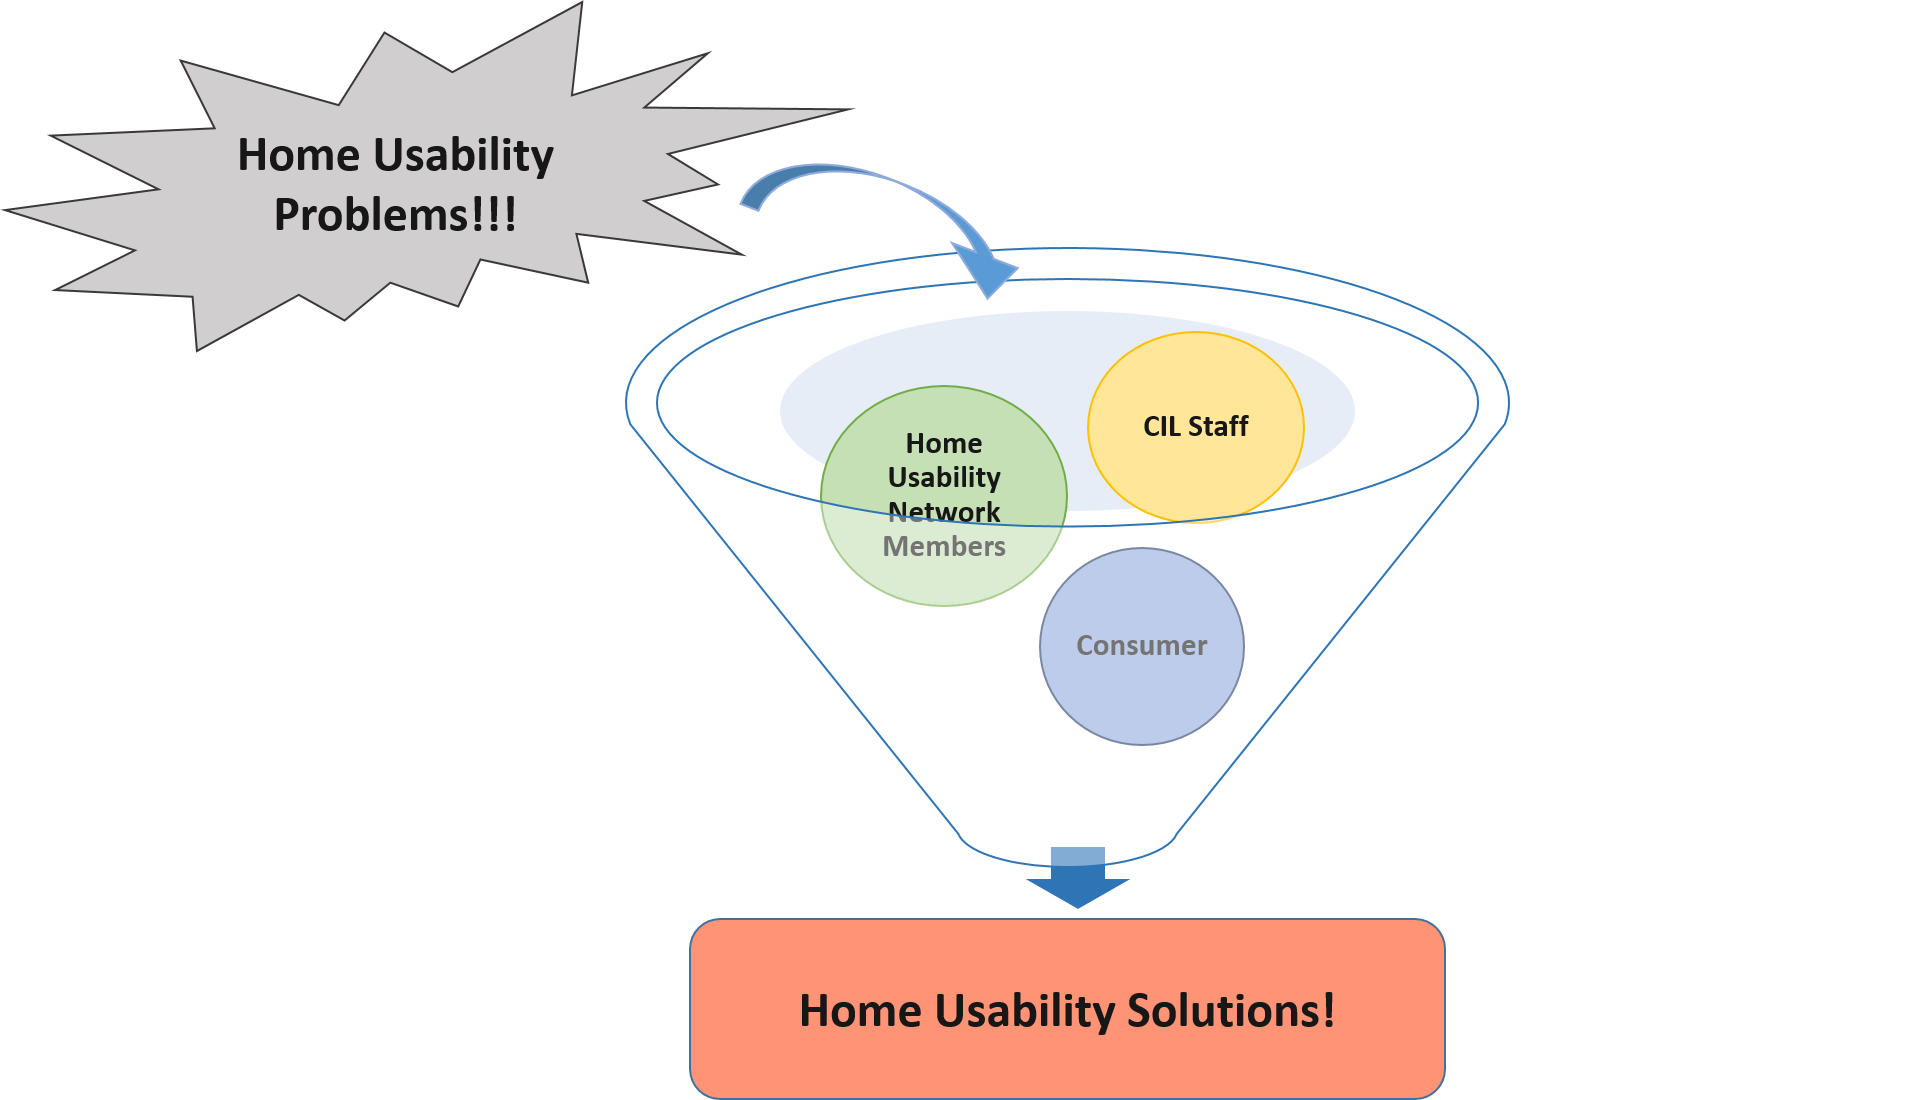 HUN Process Diagram showing home usability problems going into a funnel along with Home Usability Network Members, the CIL staff, and the consumer. These mix together in the funnel and produce home usability solutions. 